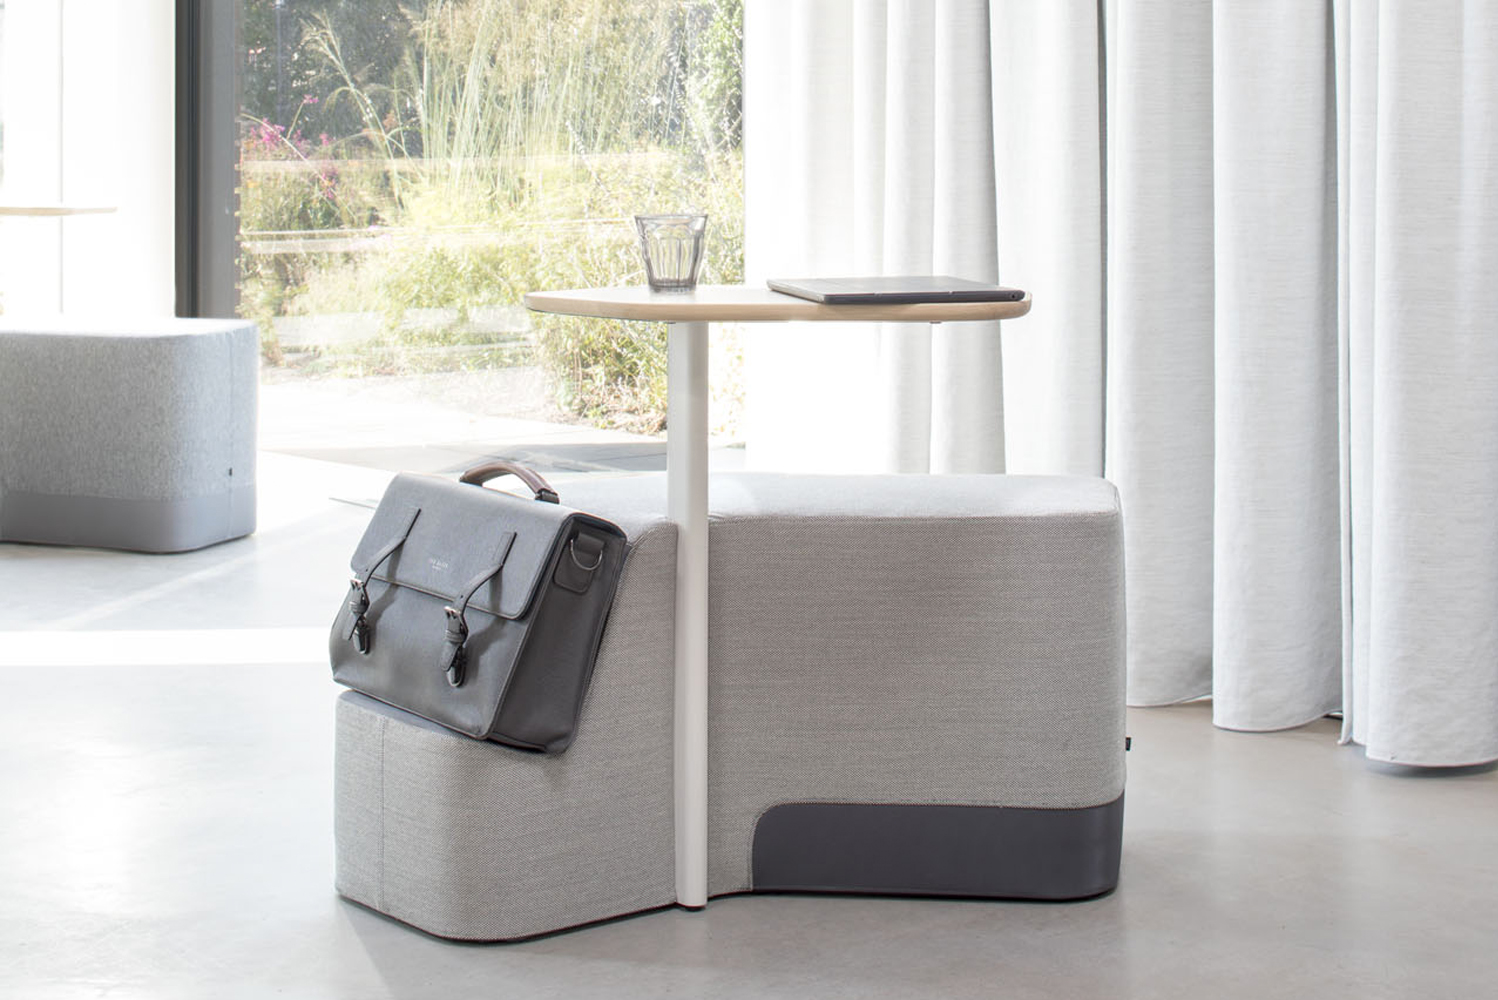 Introducing the Mono workstation by Arco 